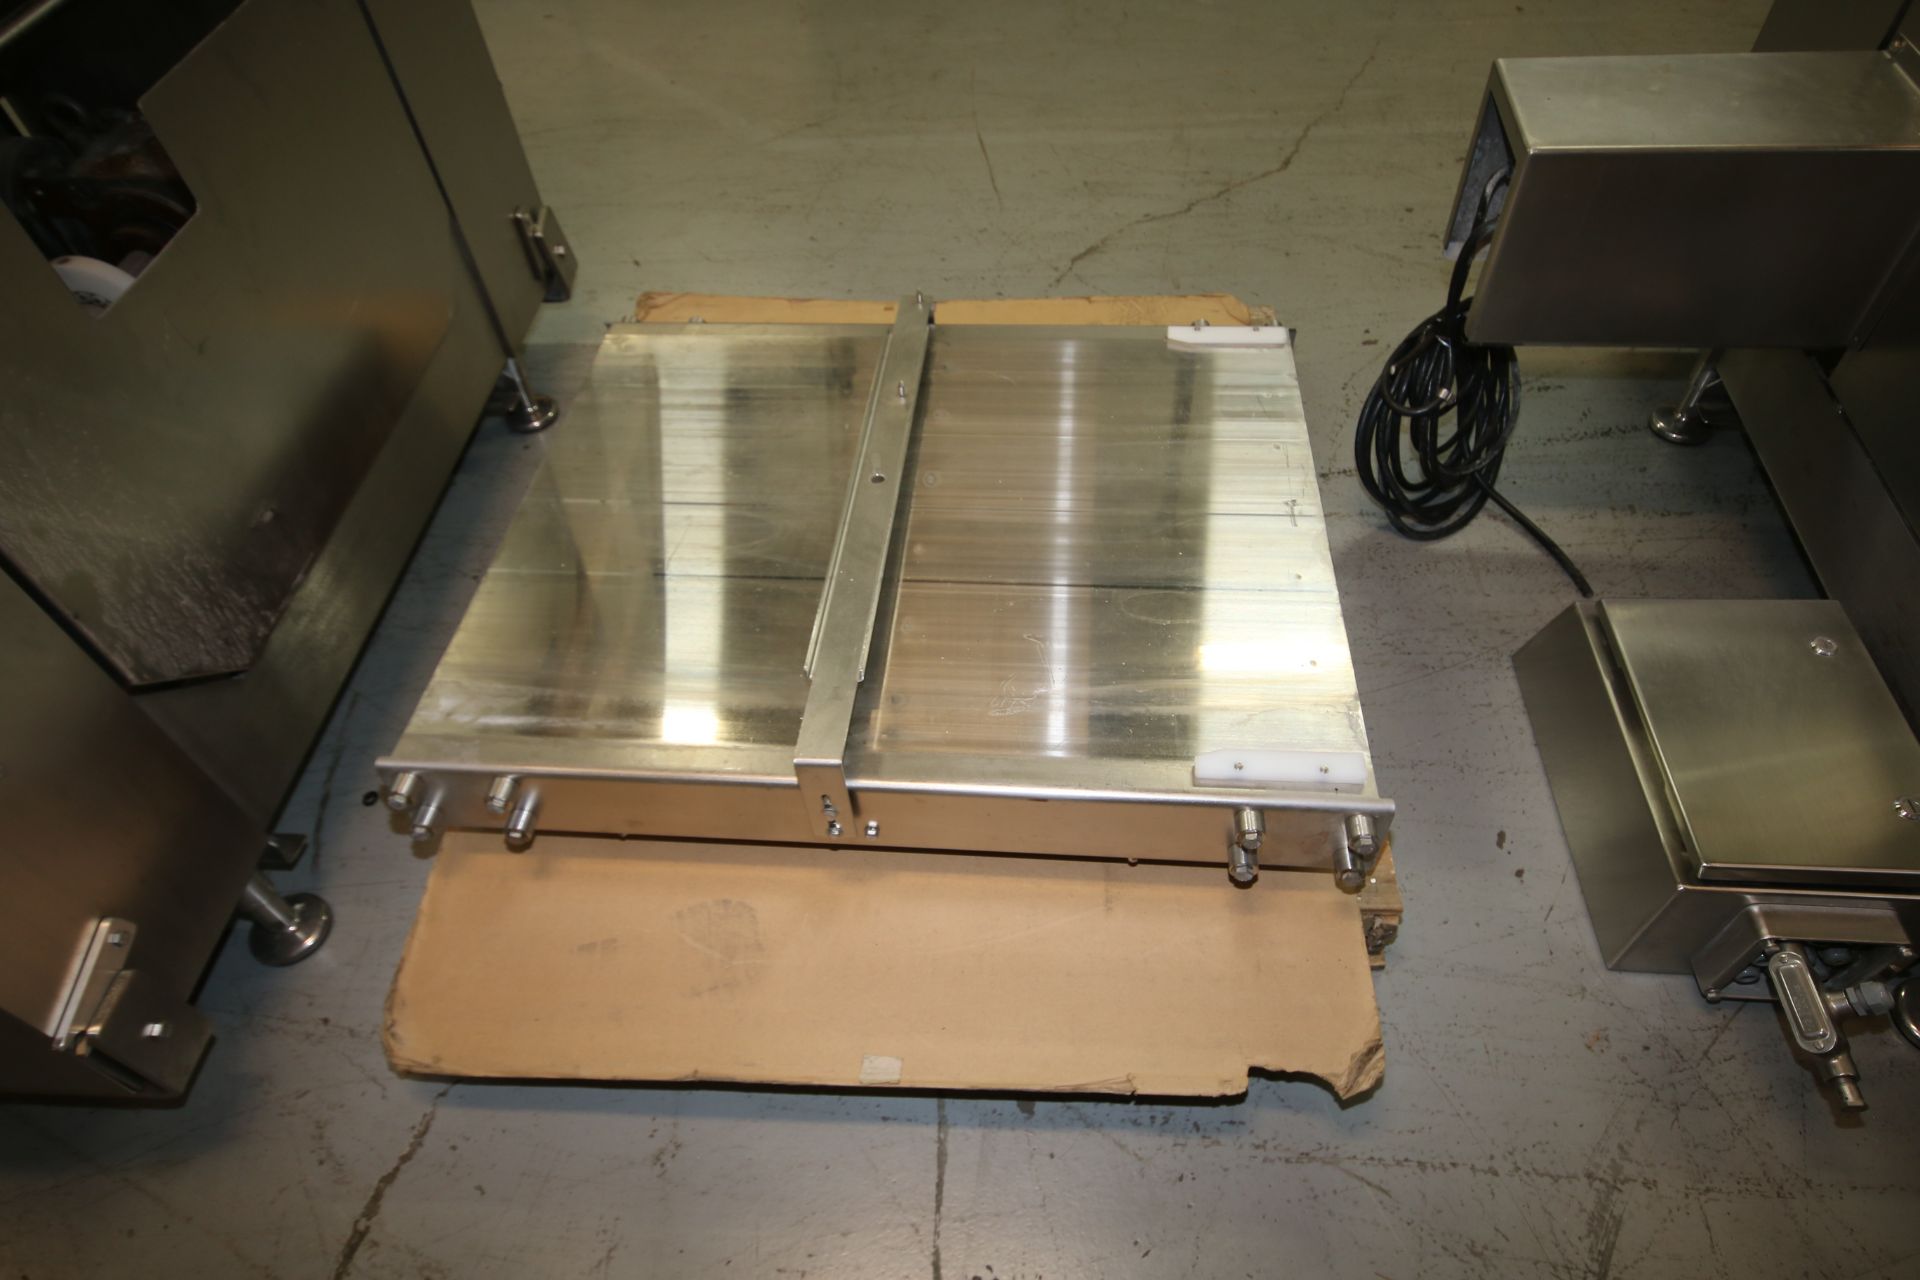 Moline 5 pcs @ 30 ft 9" S/S Dough Stamp / Guillotine In - Feed & Out-Feed S/S Conveyor System with - Image 7 of 13